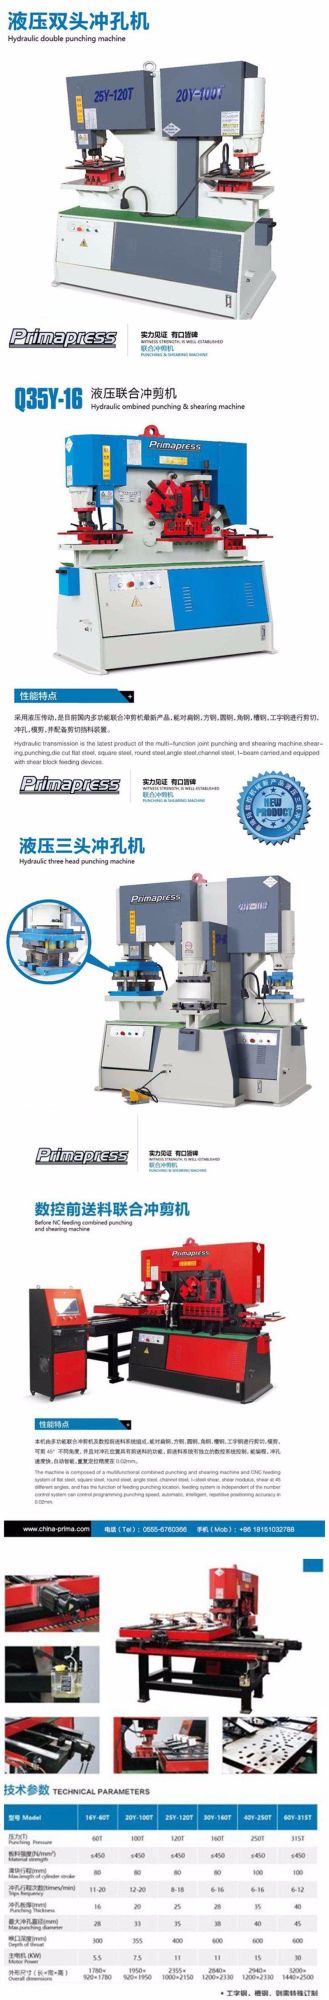 Prima Combined Punching and Shearing Machine, Hydraulic Punching and Cutting Machine, The Ironworker for Metal Works